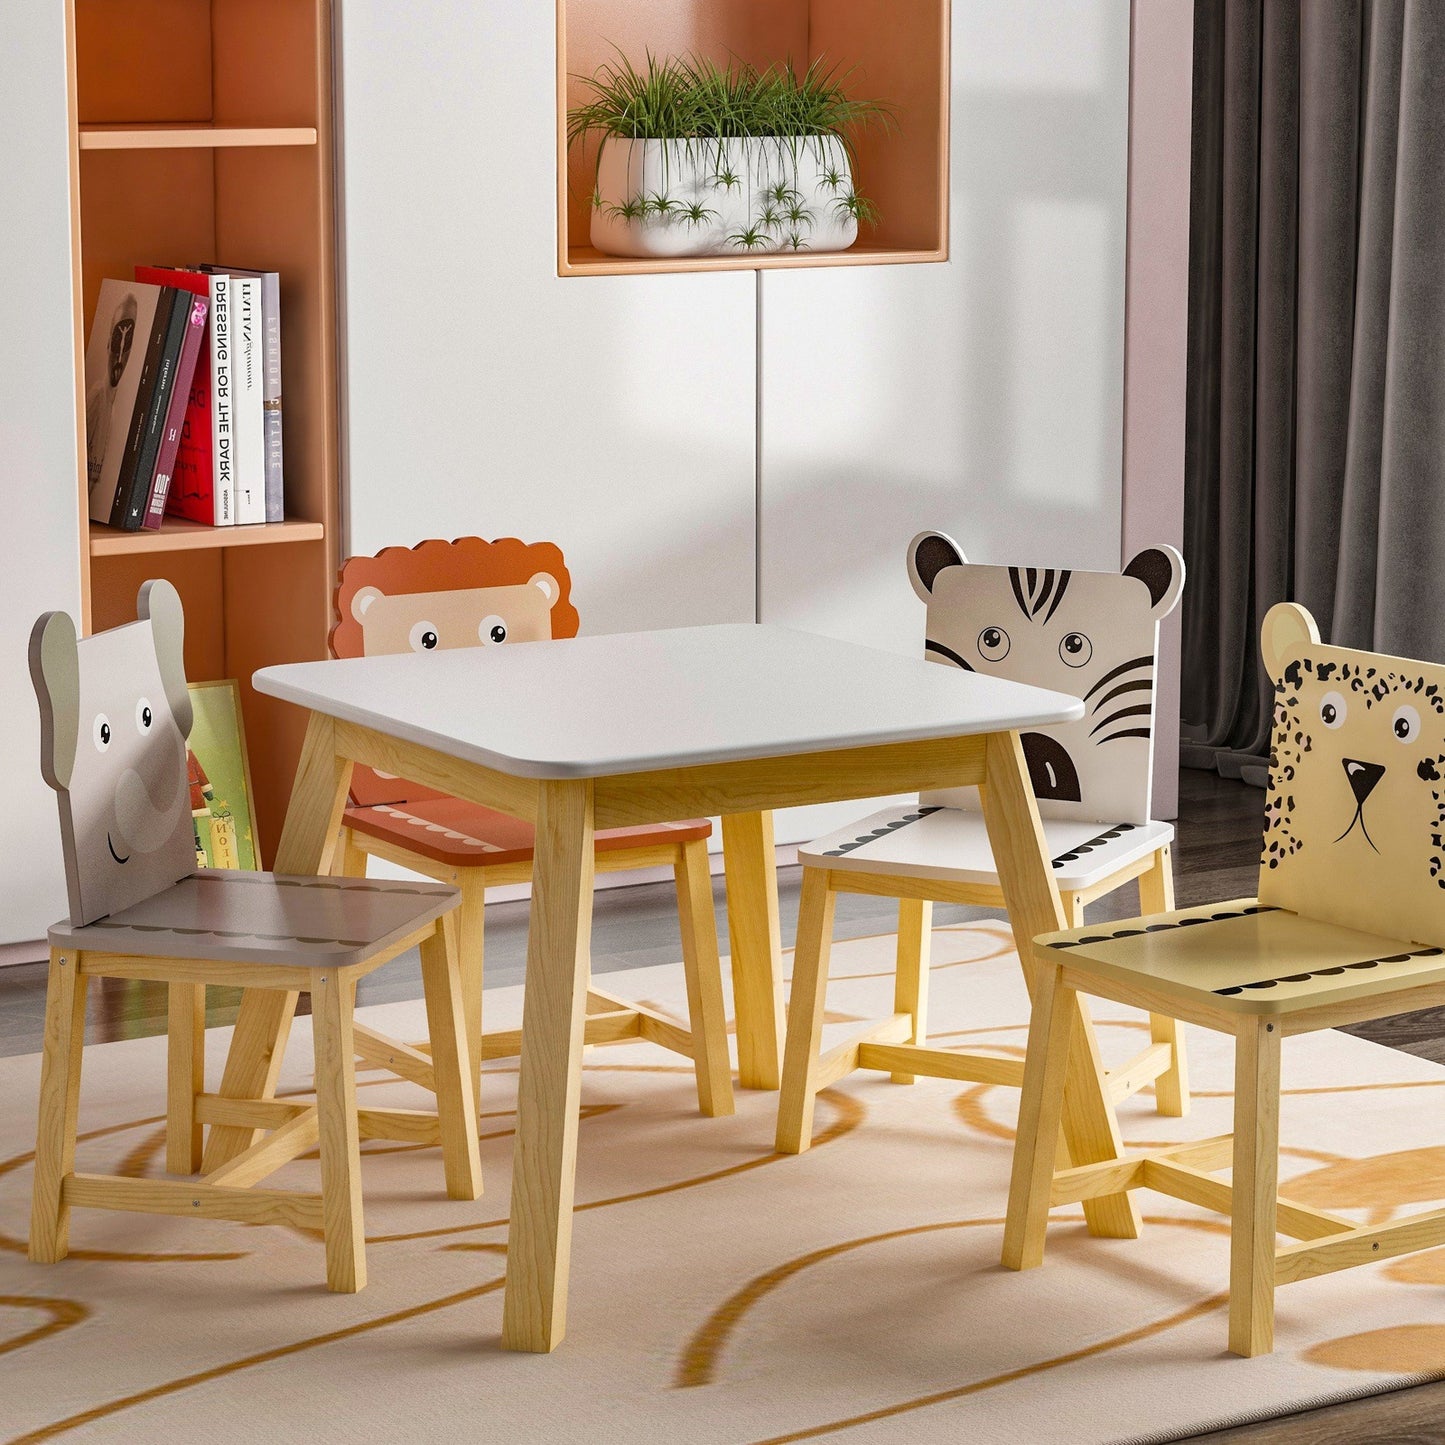 Moonriver Kids Wood Table with 4 Chairs Set Cartoon Animals